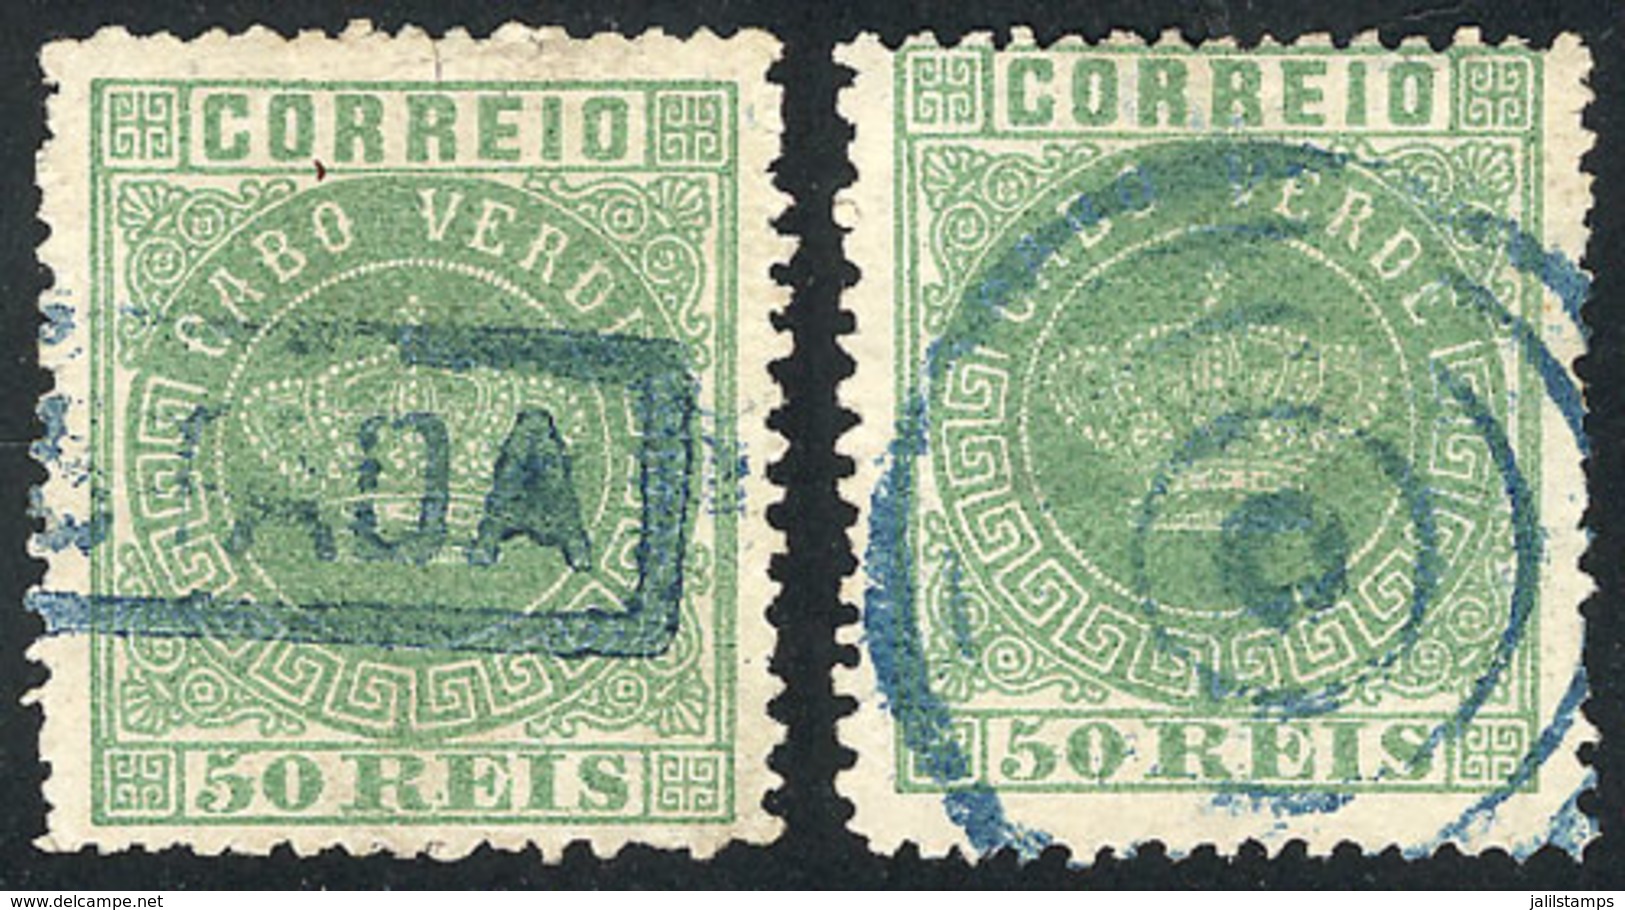 971 CAPE VERDE: Sc.6, 1877 50r. Green, Perf 12½, 2 Used Examples With Different Cancels, Catalogue Value US$145, VF Qual - Isola Di Capo Verde